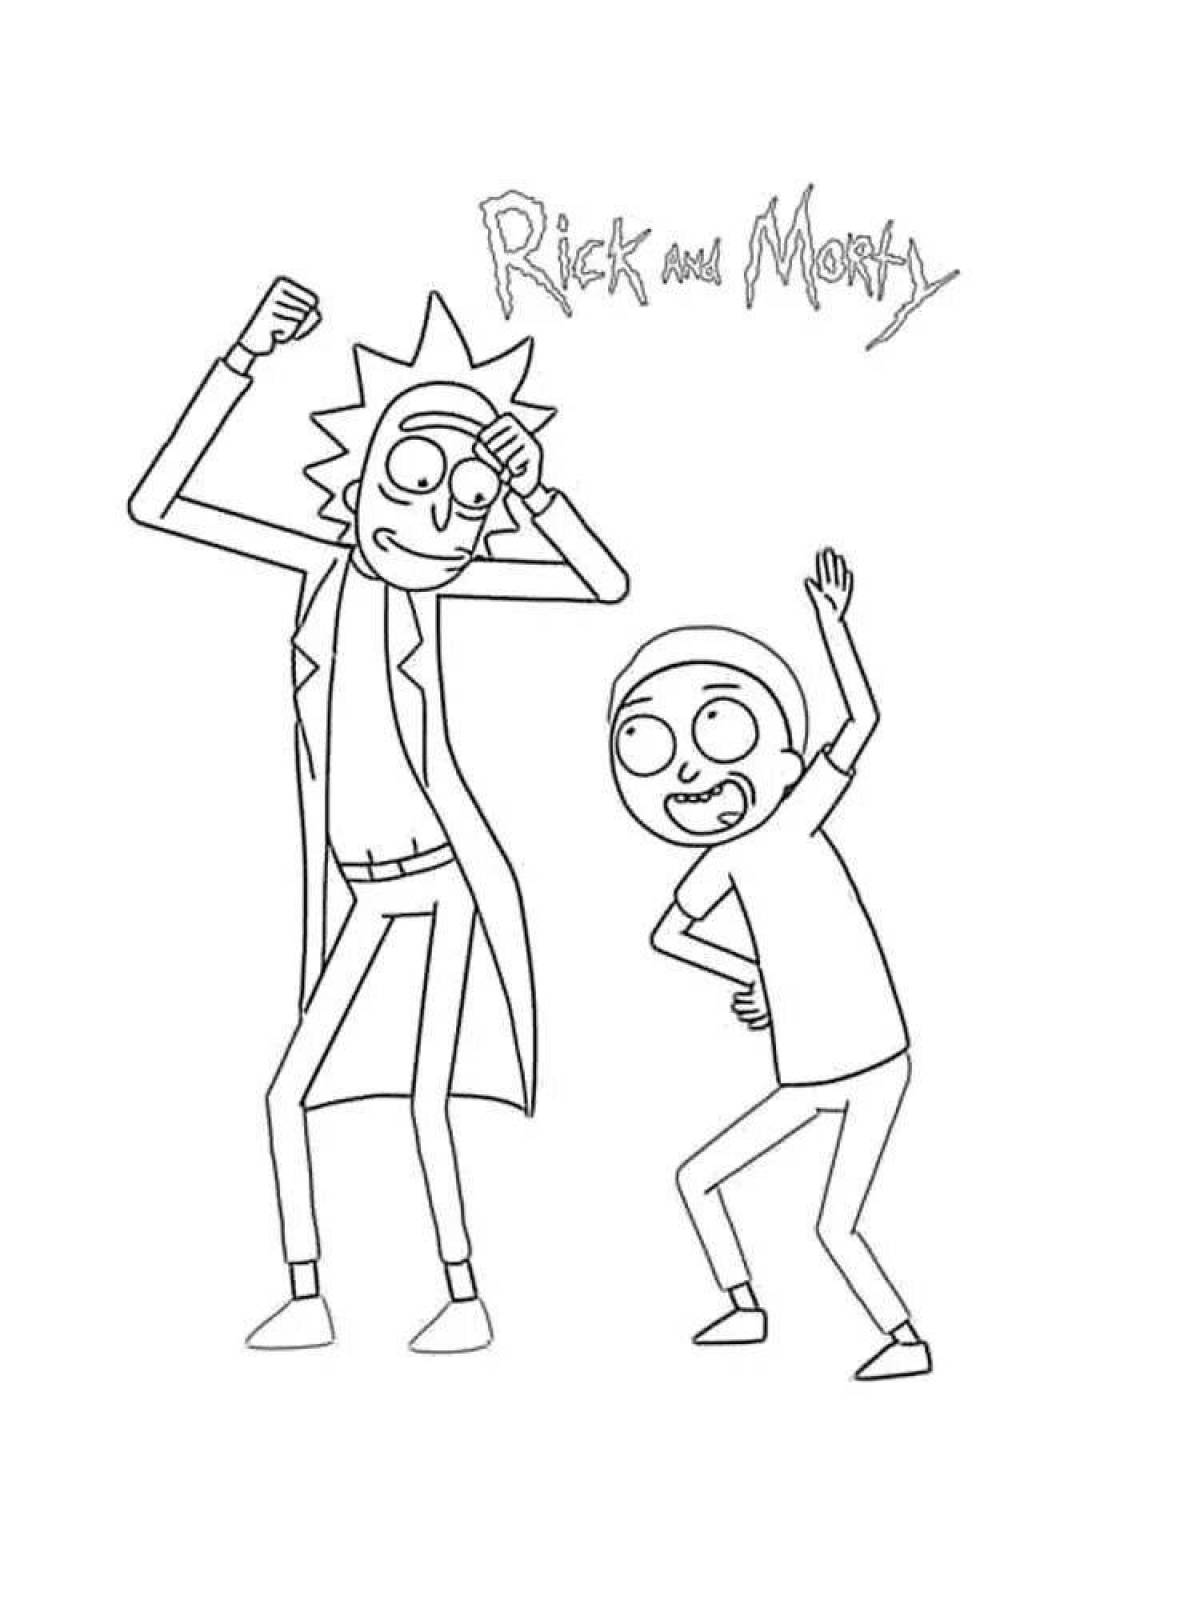 Coloring page funny rick